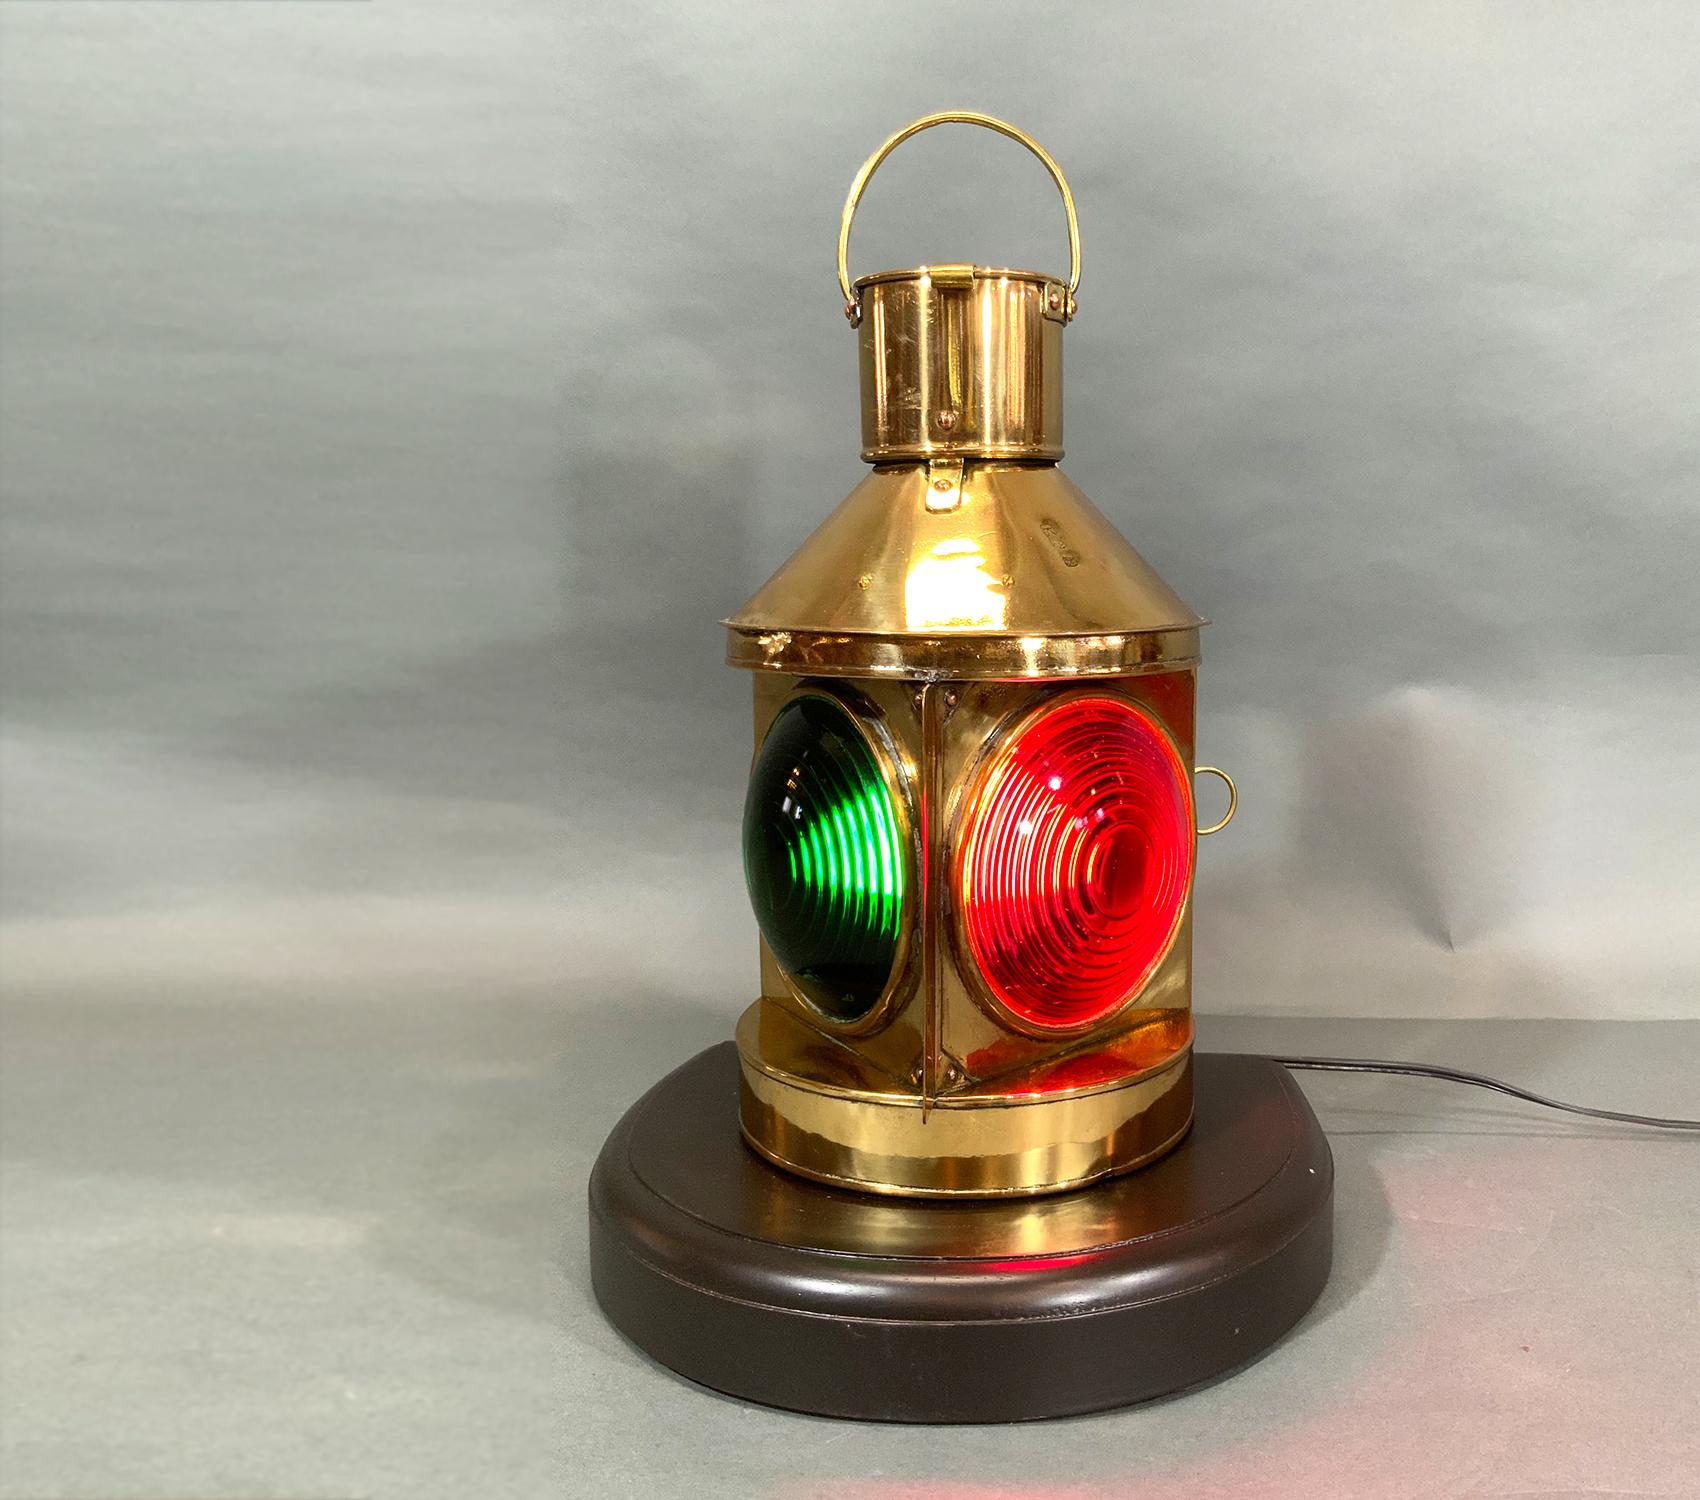 Solid brass port and starboard bow lantern from a boat. Very rare dual bullseye Fresnel lens design bow light in a highly polished solid brass case that is mounted to a mahogany base. Wired with electricity for home use. Impressed with Asian writing